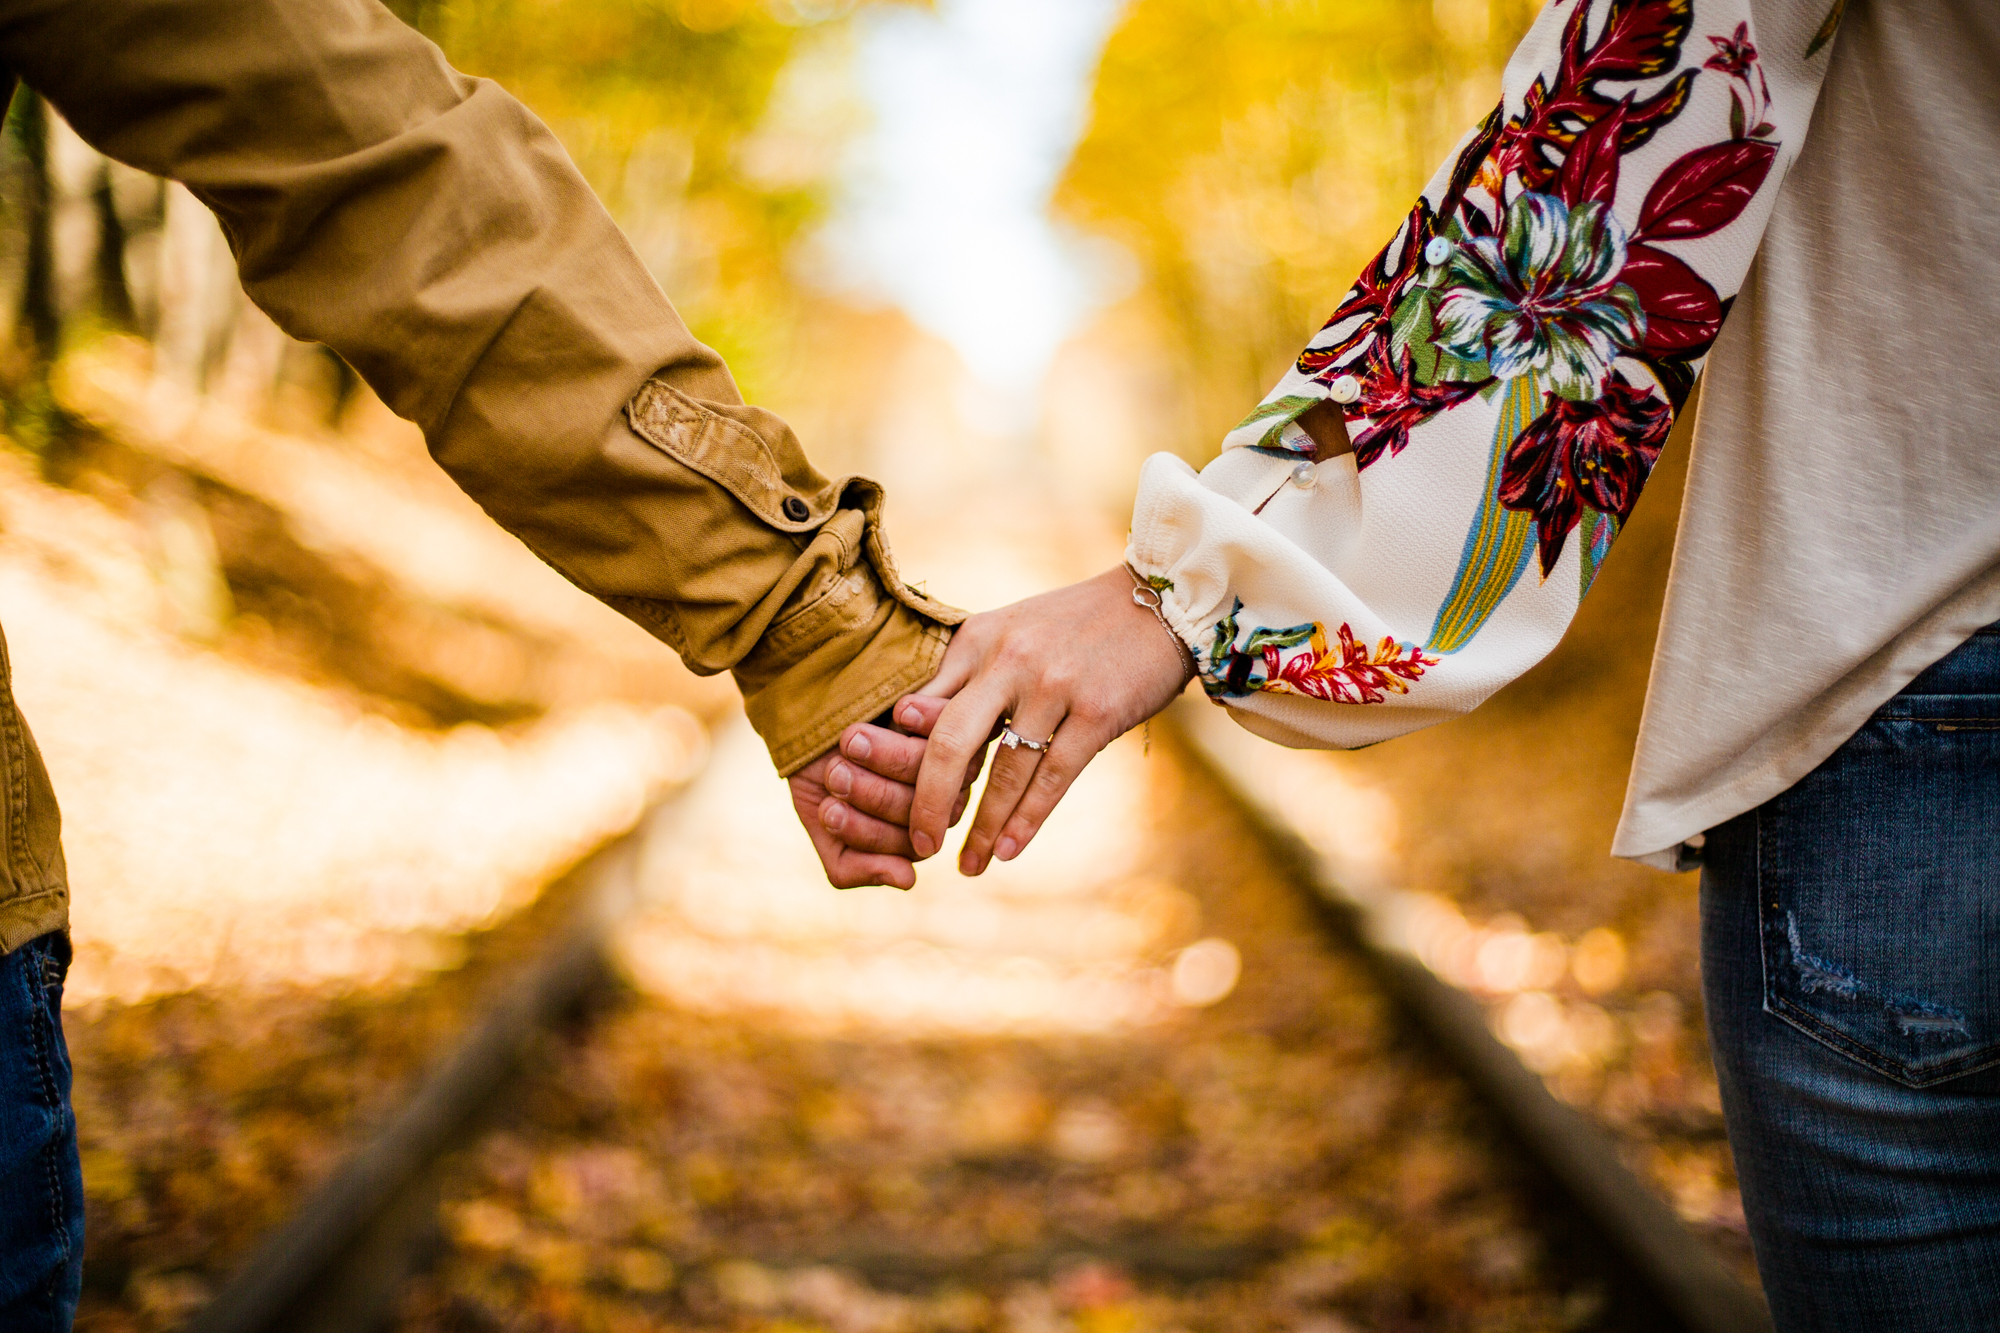 Hands clasped in front of abandoned railroad tracks during a couple's engagement photo session